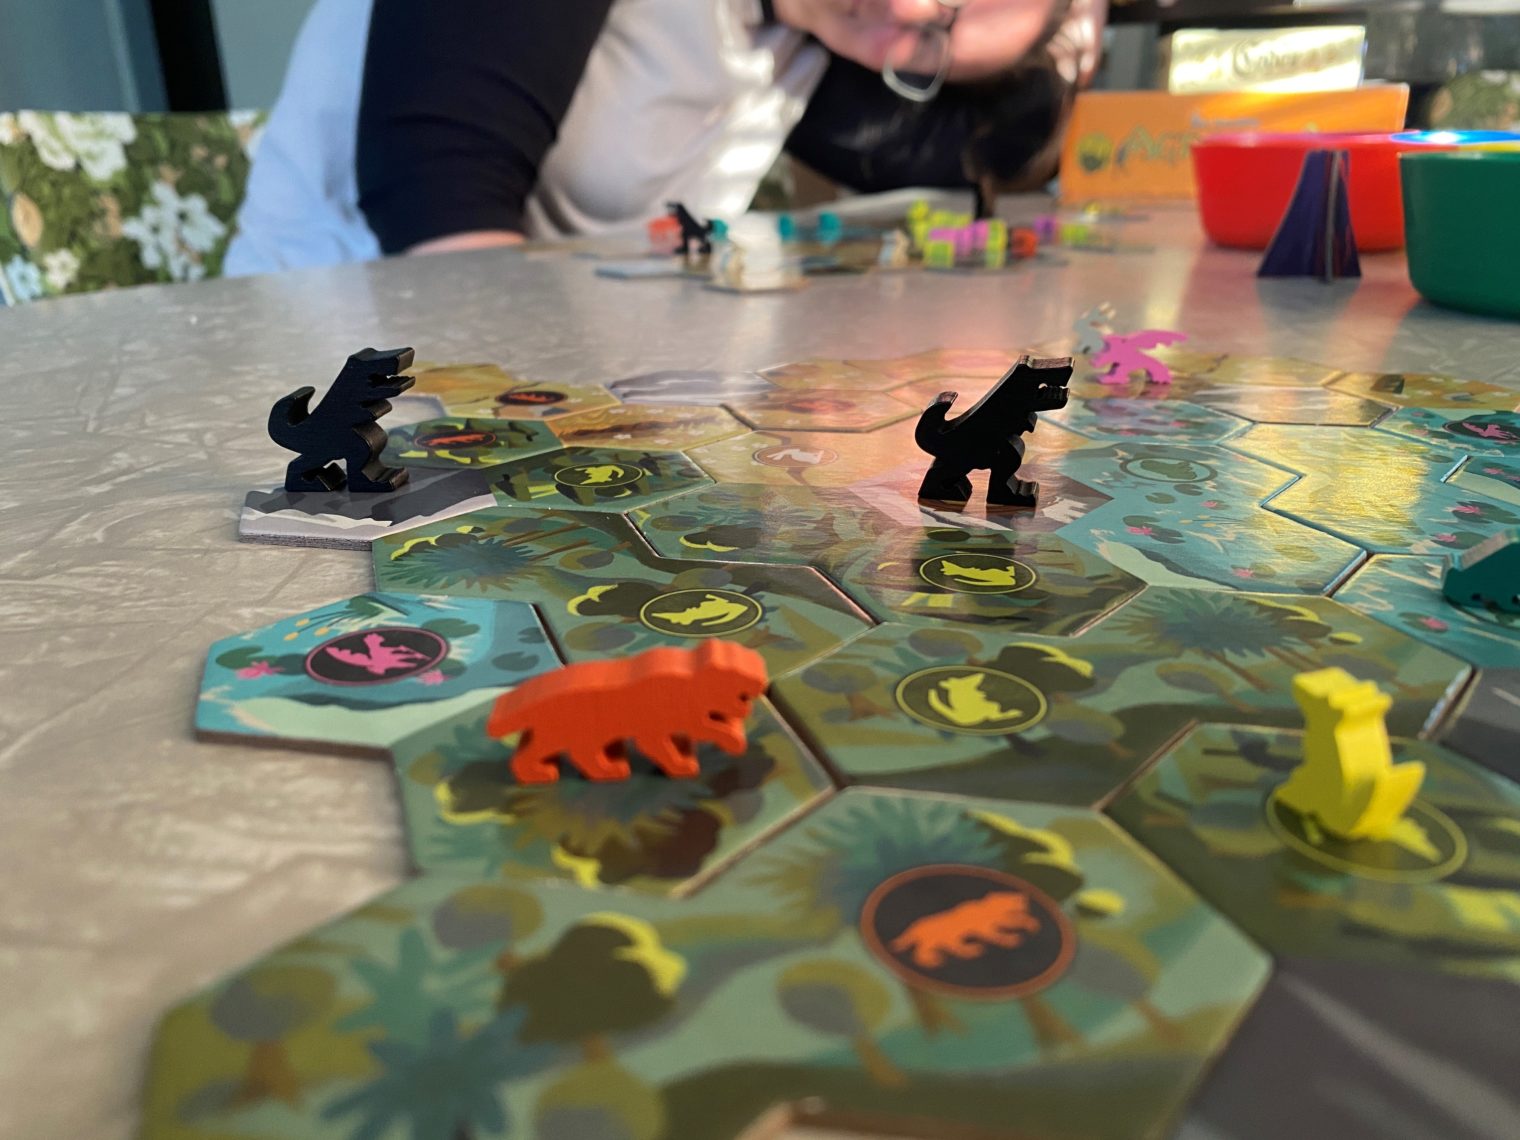 Gods Love Dinosaurs game showing tiles, animal meeples.